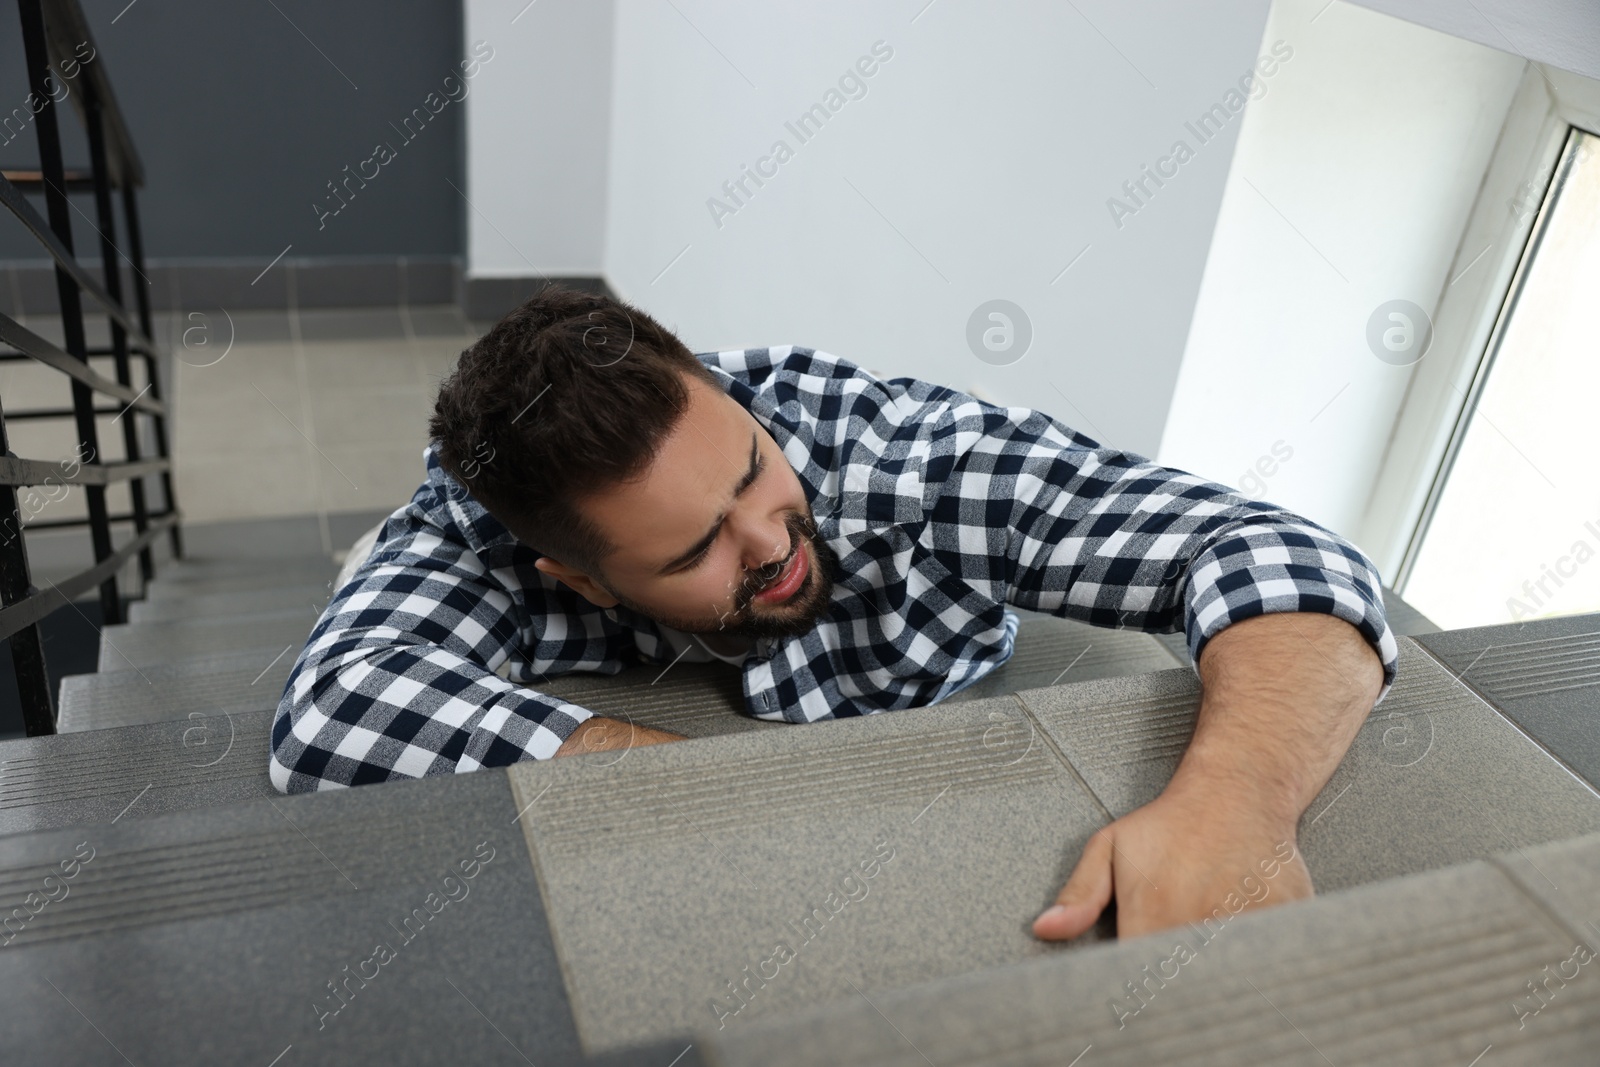 Photo of Man fallen down stairs suffering from pain indoors